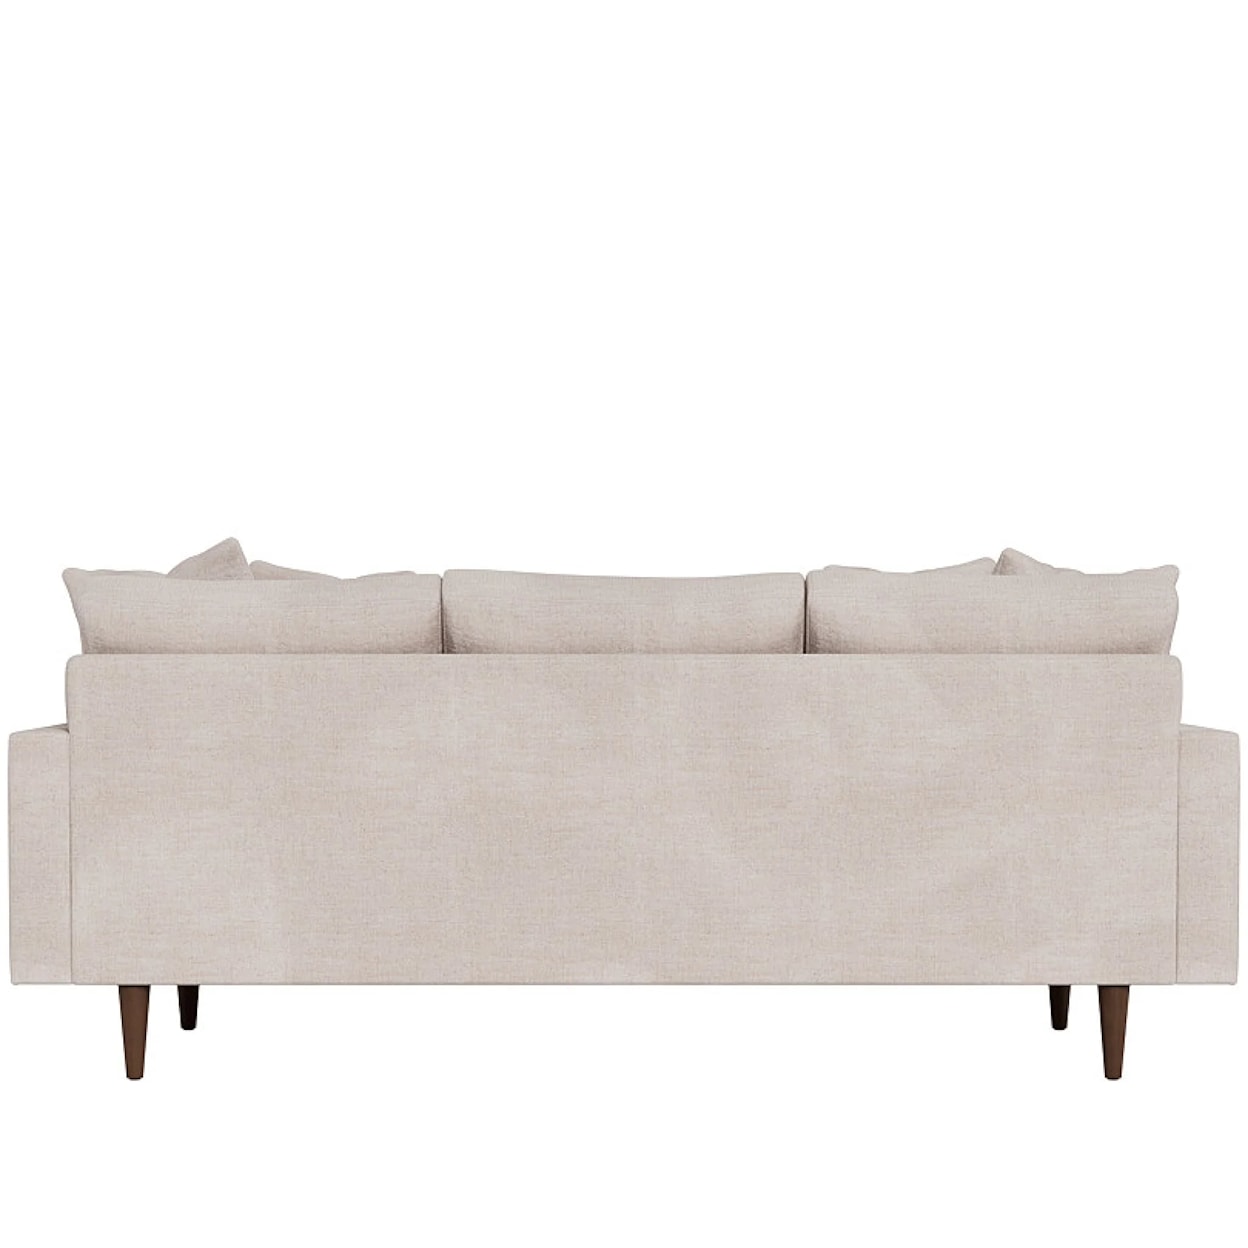 Universal Special Order Brentwood Sofa